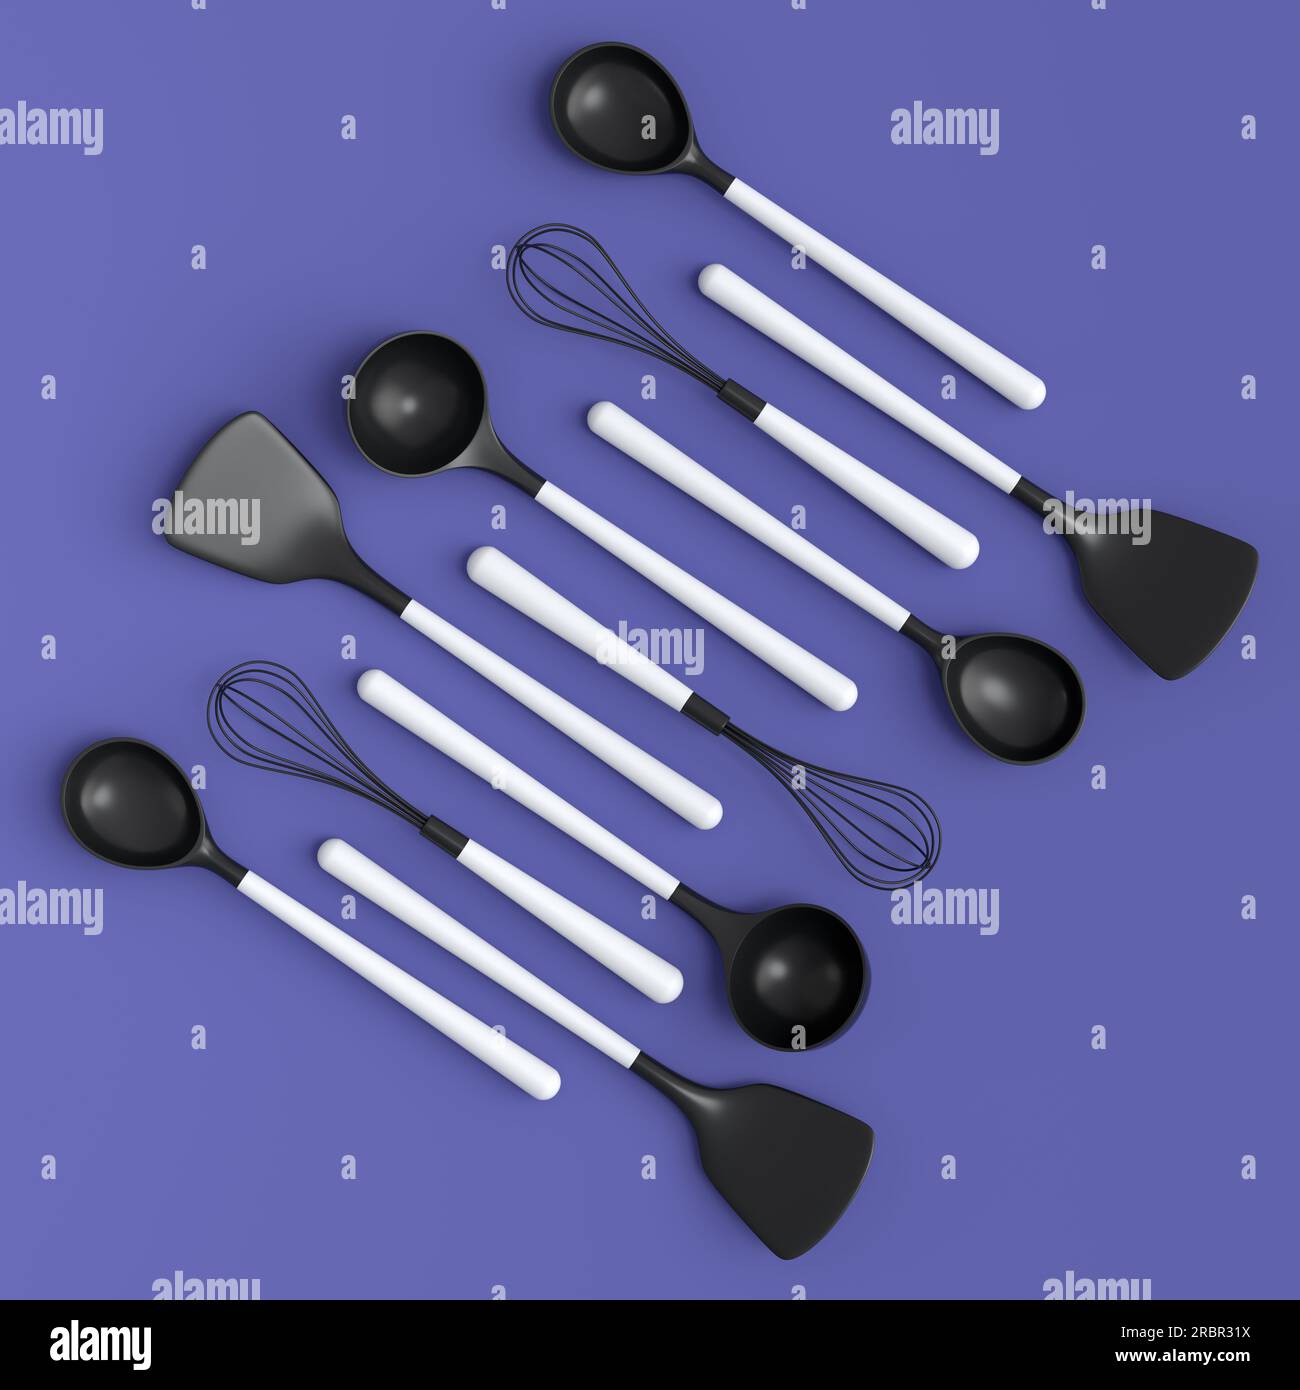 https://c8.alamy.com/comp/2RBR31X/wooden-kitchen-utensils-tools-and-equipment-on-violet-background-3d-render-of-home-kitchen-tools-and-accessories-for-cooking-2RBR31X.jpg